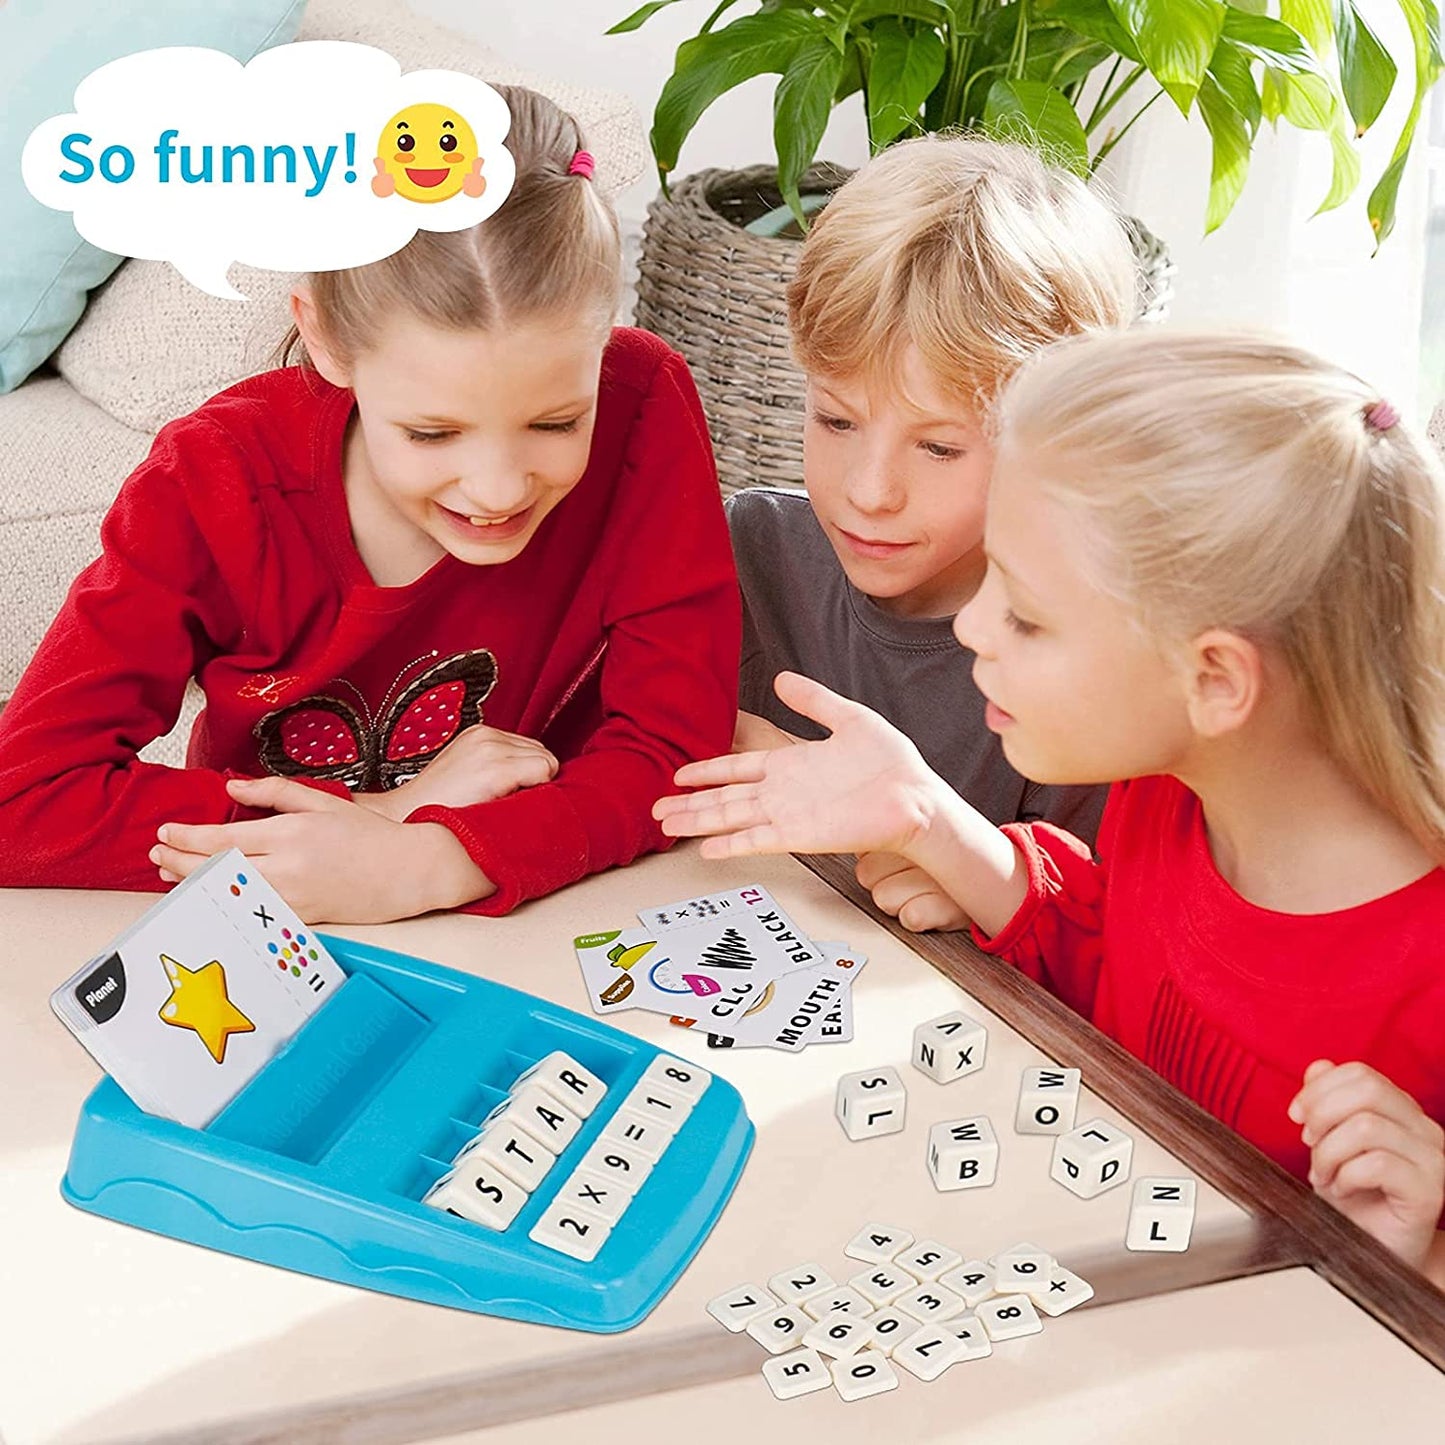 Fun and Educational Toys for Kids - Alphabet and Math Learning Gifts